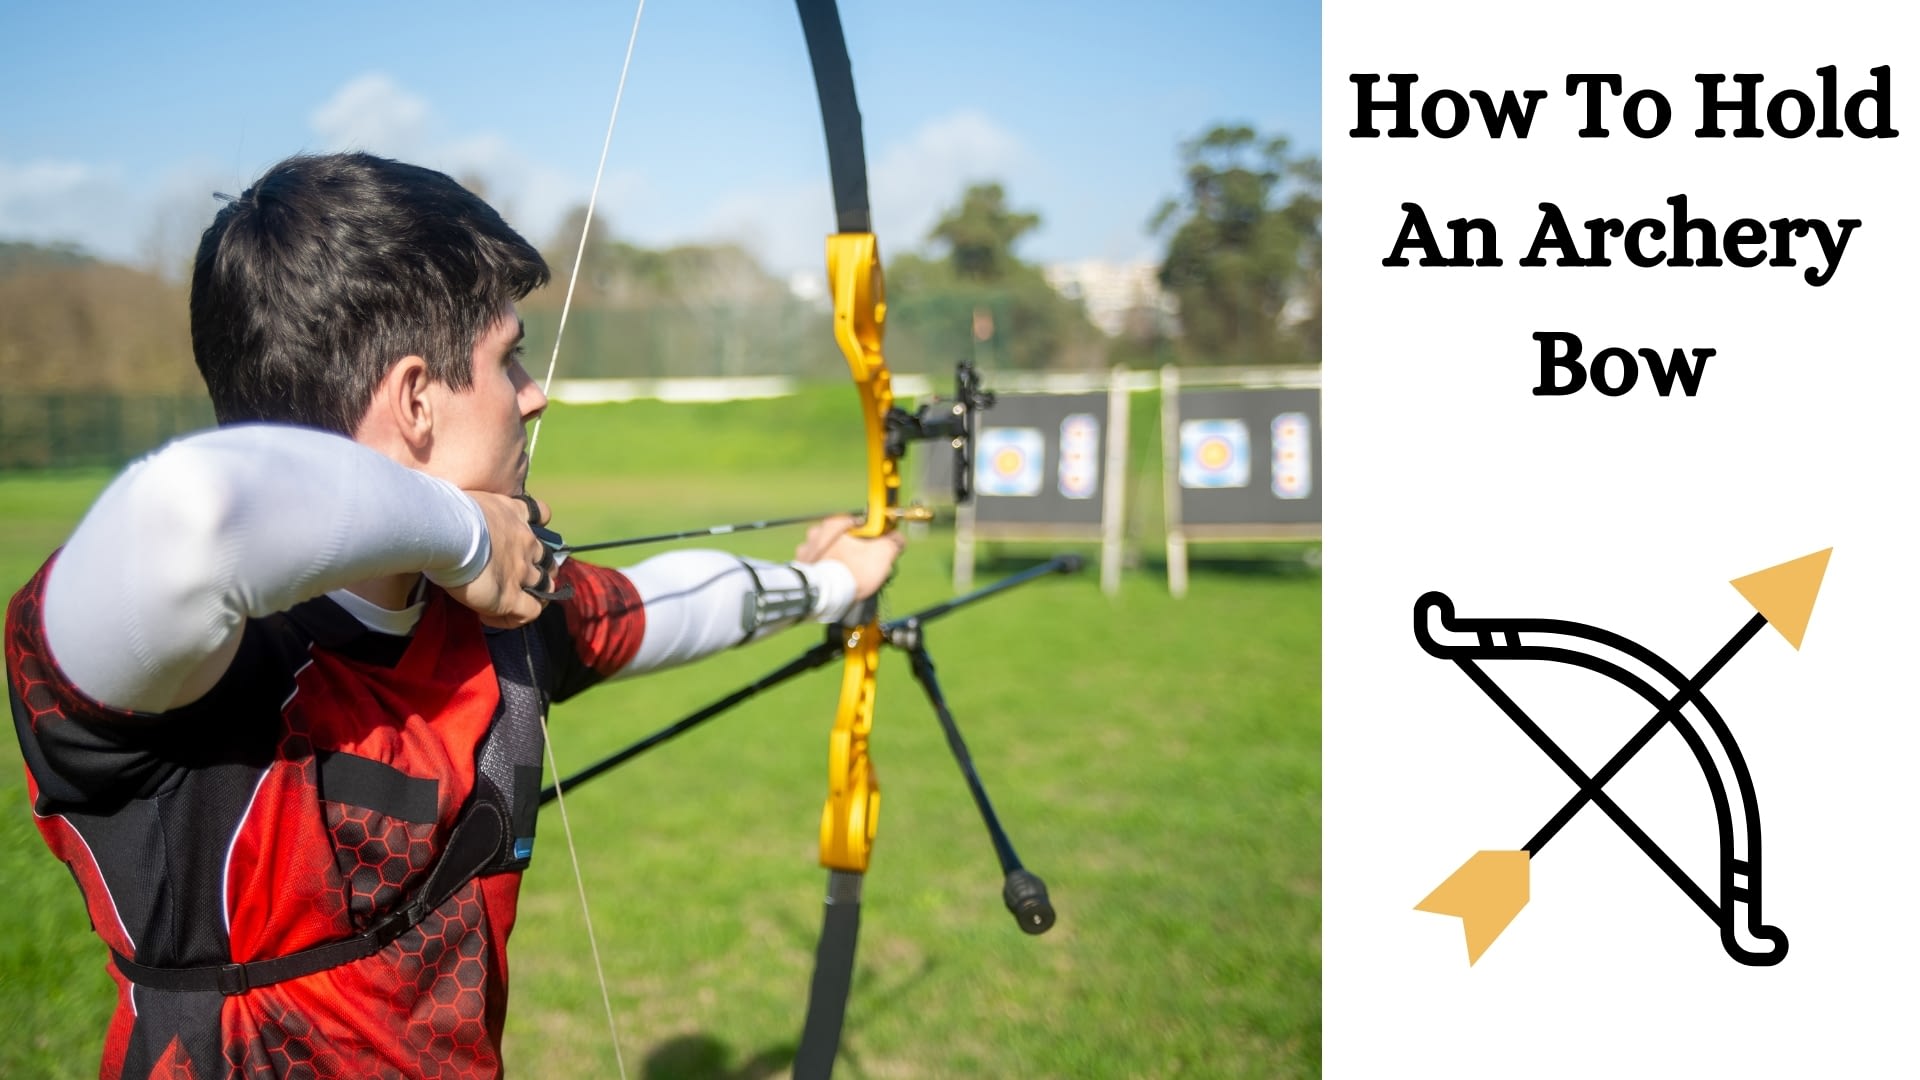 How To Hold An Archery Bow